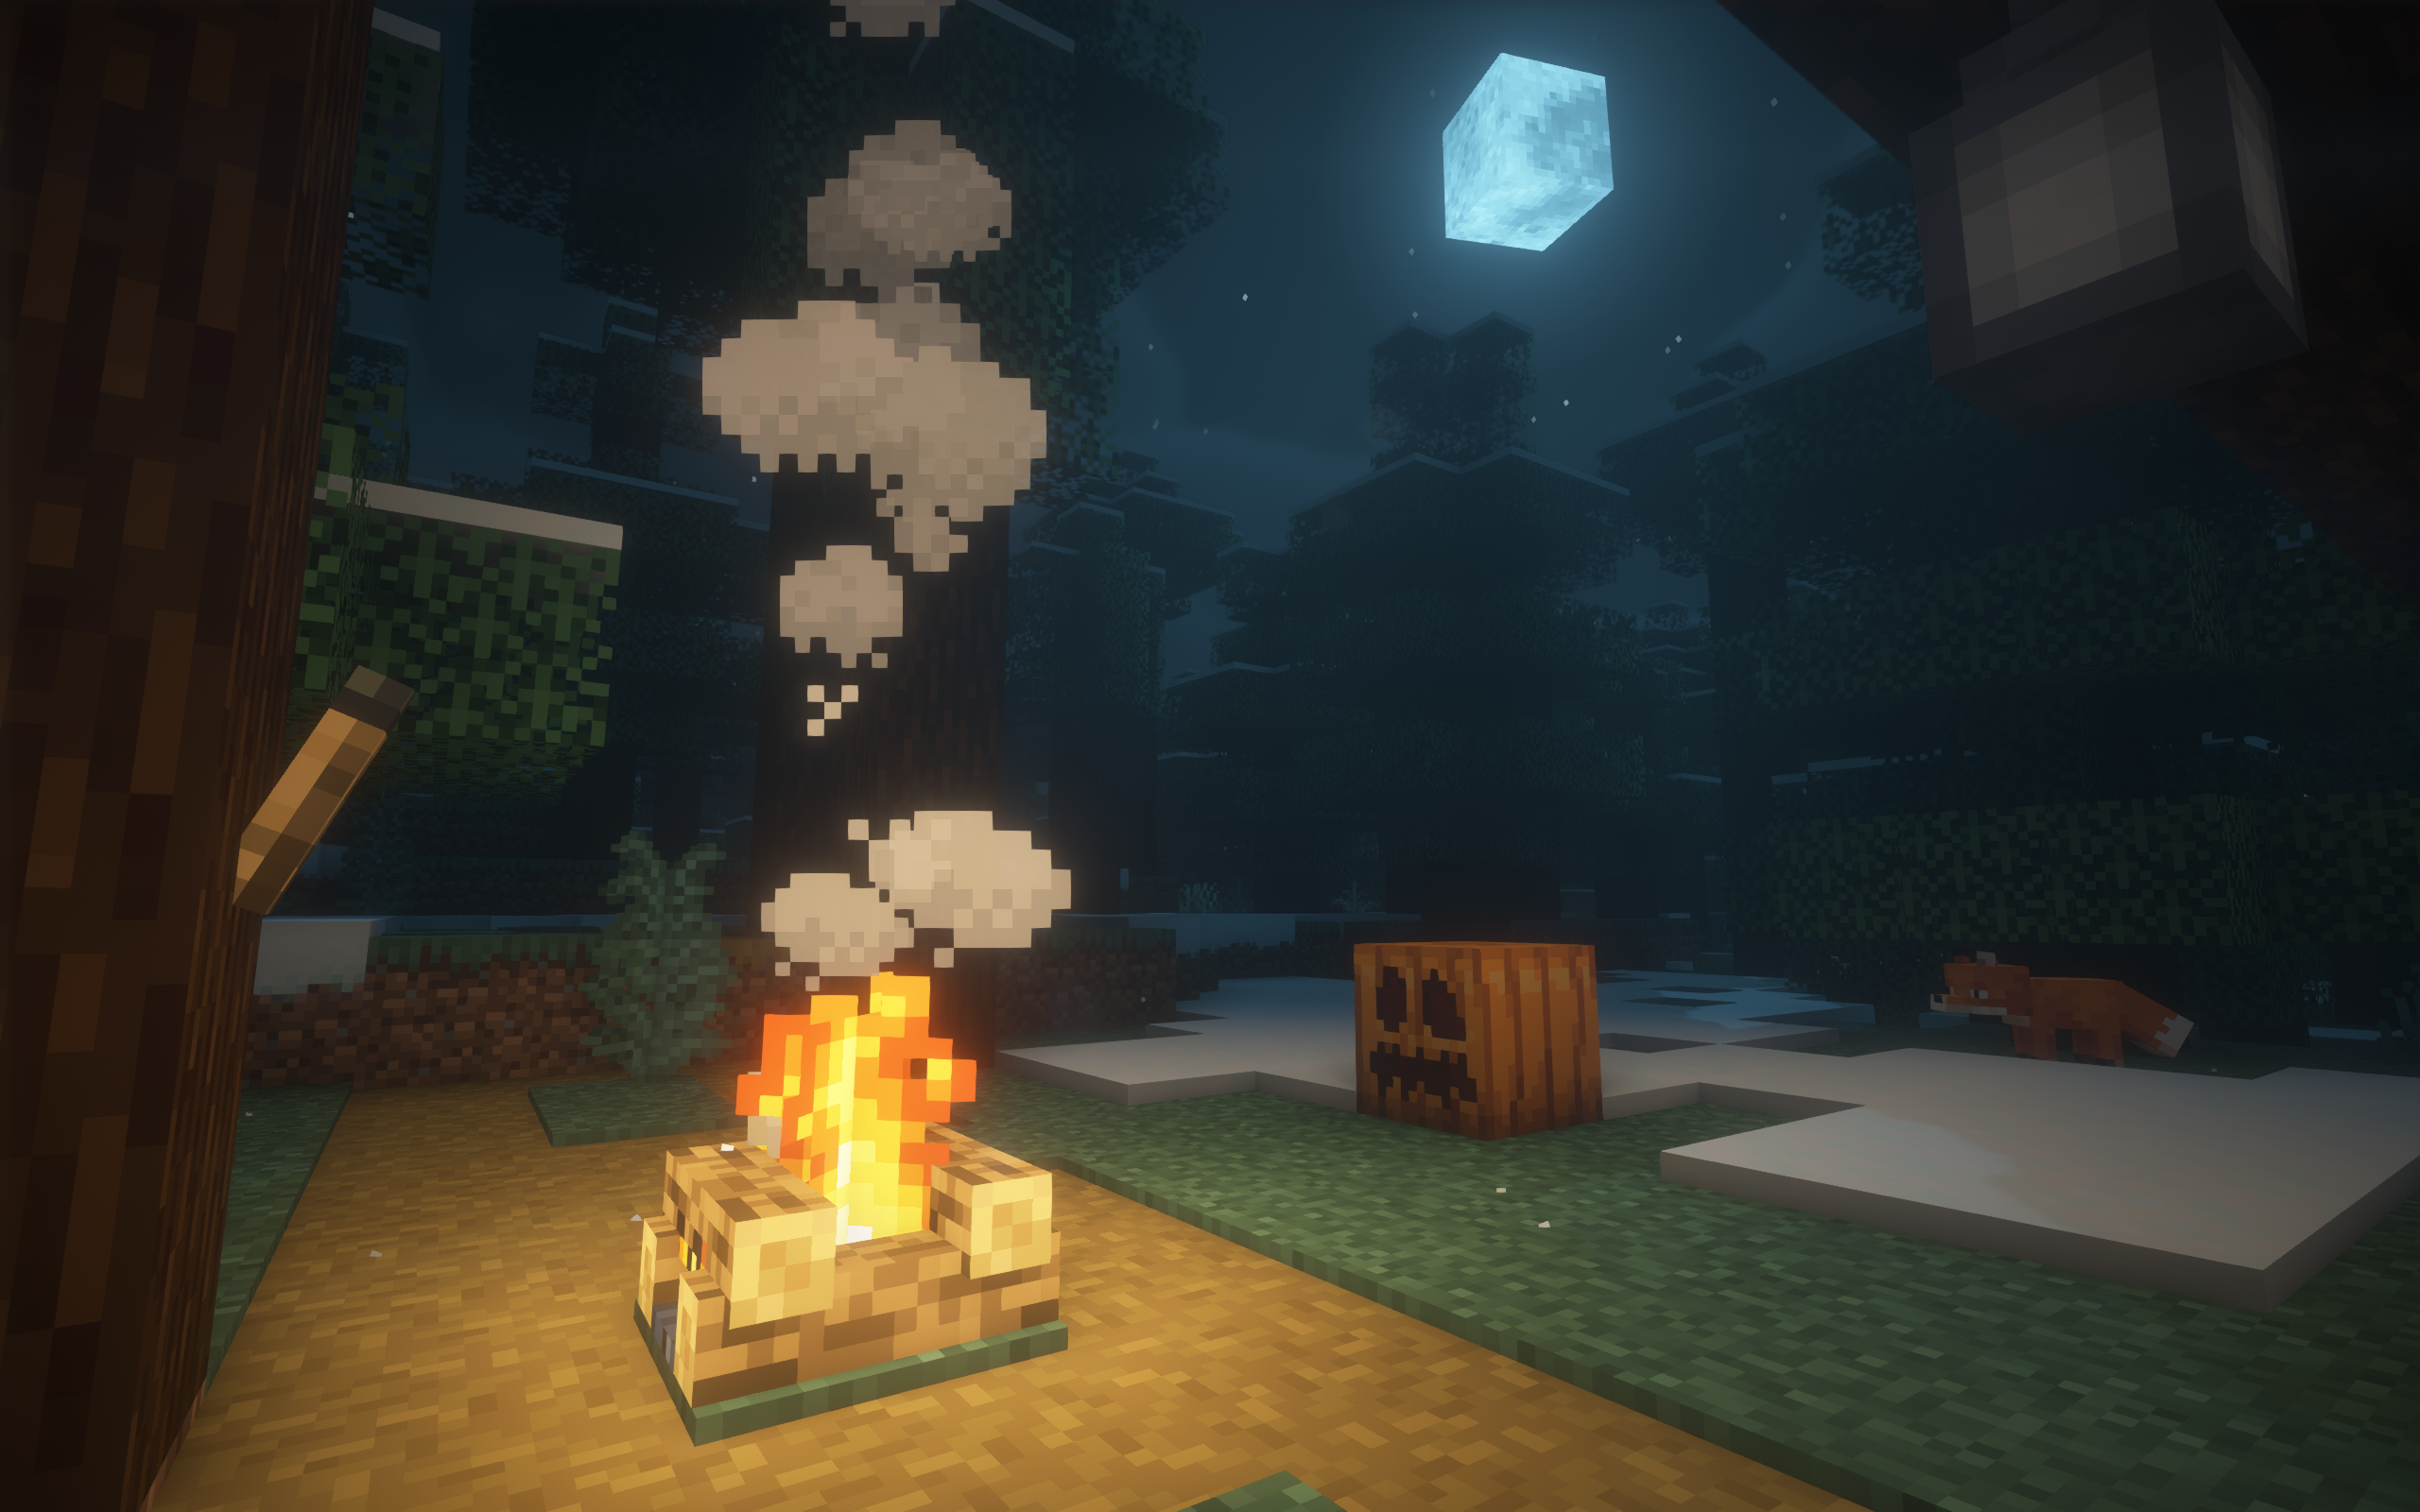 A campfire burns in the dark night, moonlight shining past the canopy of the treetops. An unlit torch, lantern, and jack o'lantern reside close by. Villagers were likely celebrating Halloween ...